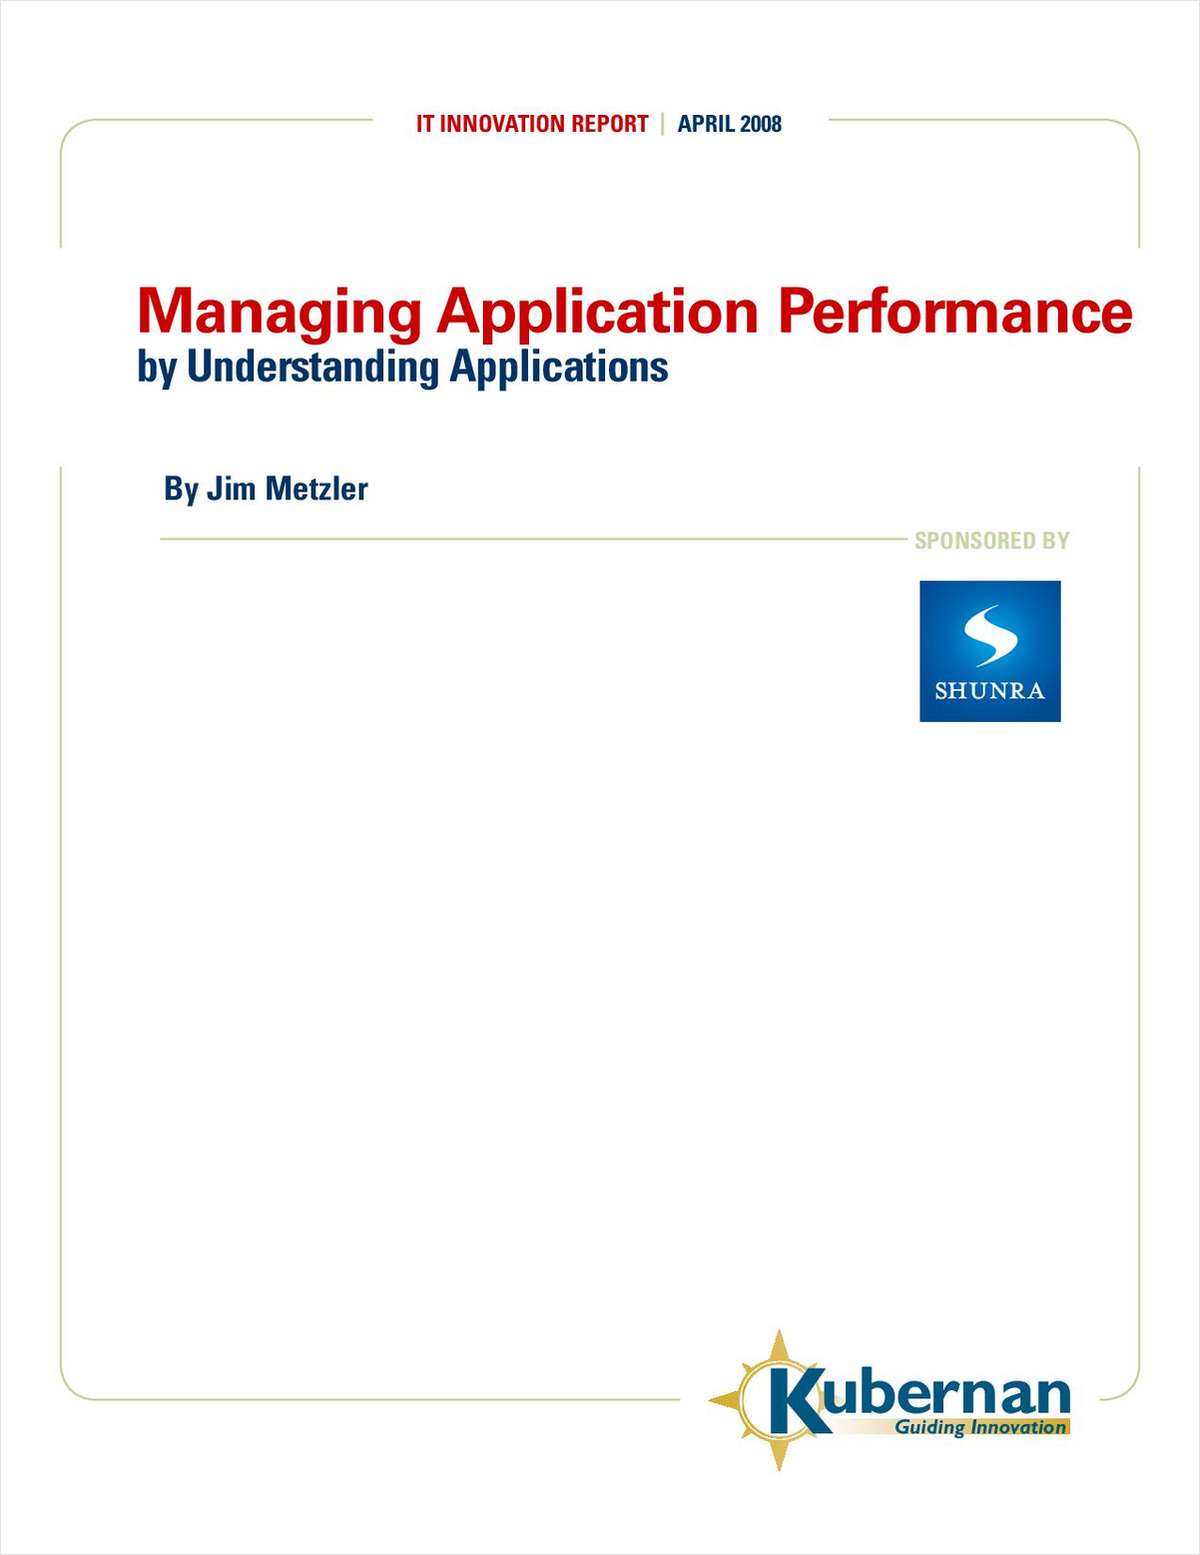 Managing Application Performance by Understanding Applications